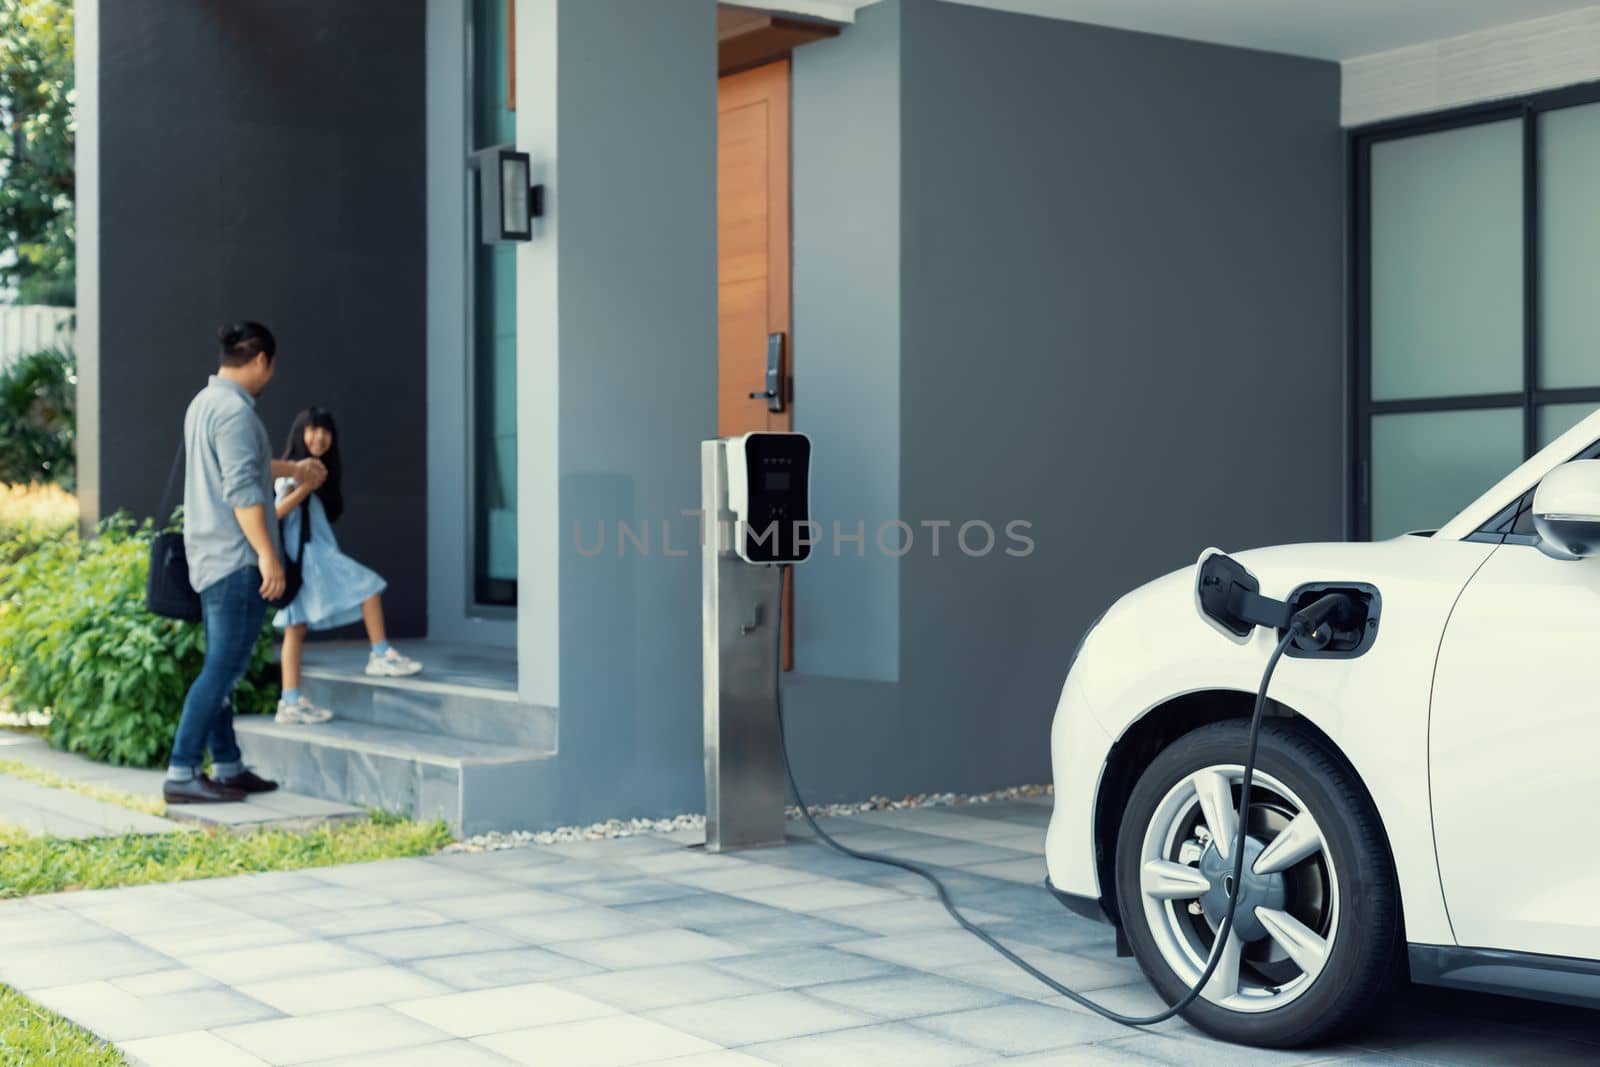 Focus progressive electric vehicle recharging at home charging station using clean and renewable energy with blurred father and daughter walking in background for future renewable energy concept.